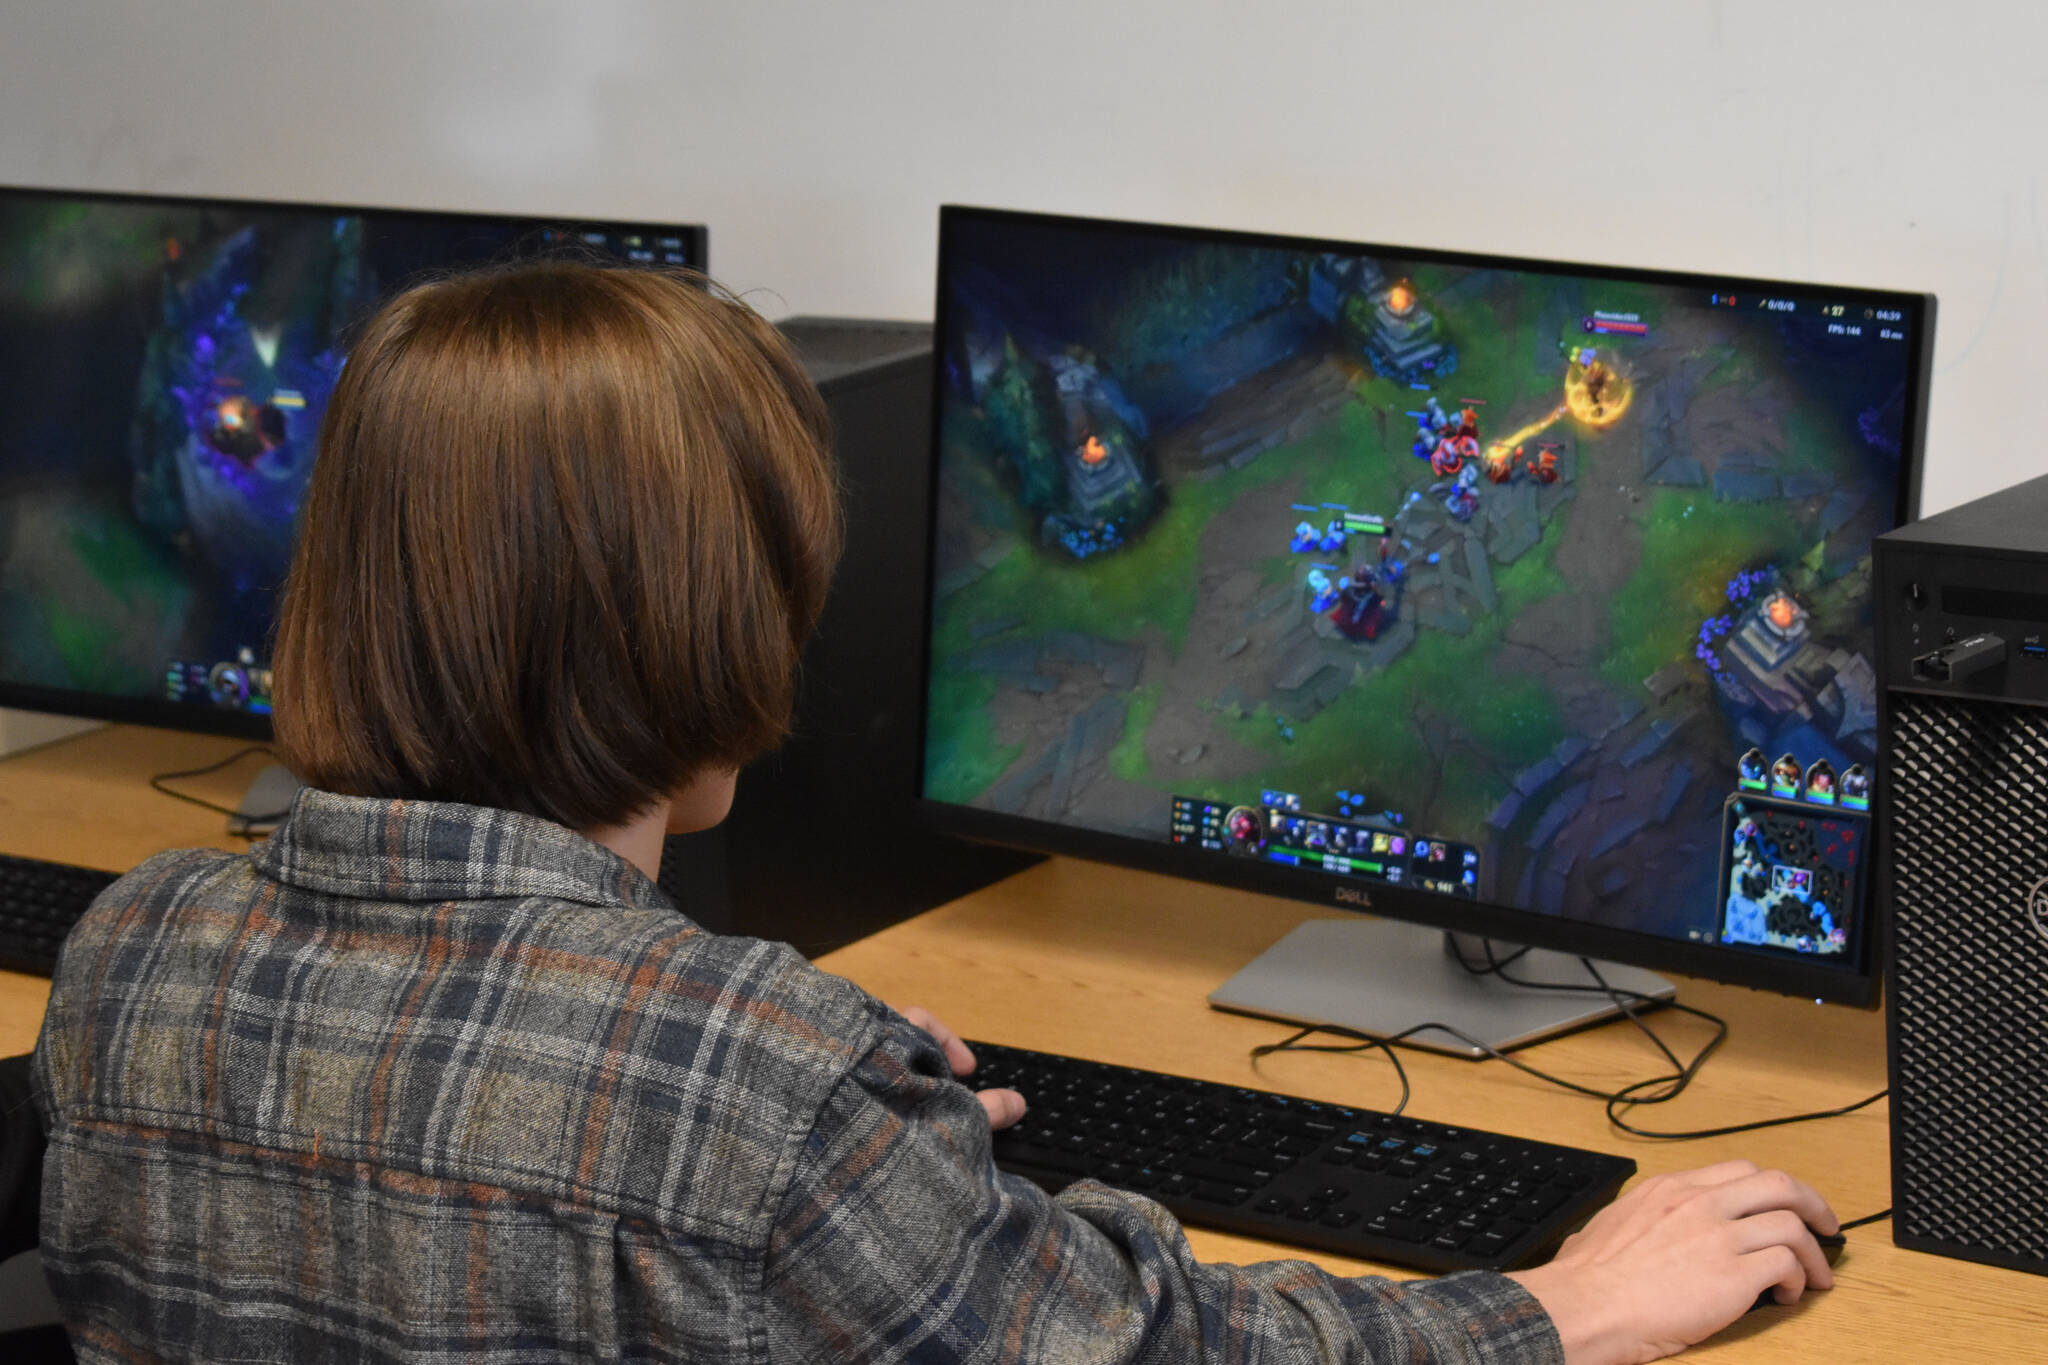 Cody Good competes for Kenai Central High School during a League of Legends match against Anchorage Christian Schools on Tuesday, Sept. 23, 2022, at Kenai Central High School in Kenai, Alaska. (Jake Dye/Peninsula Clarion)